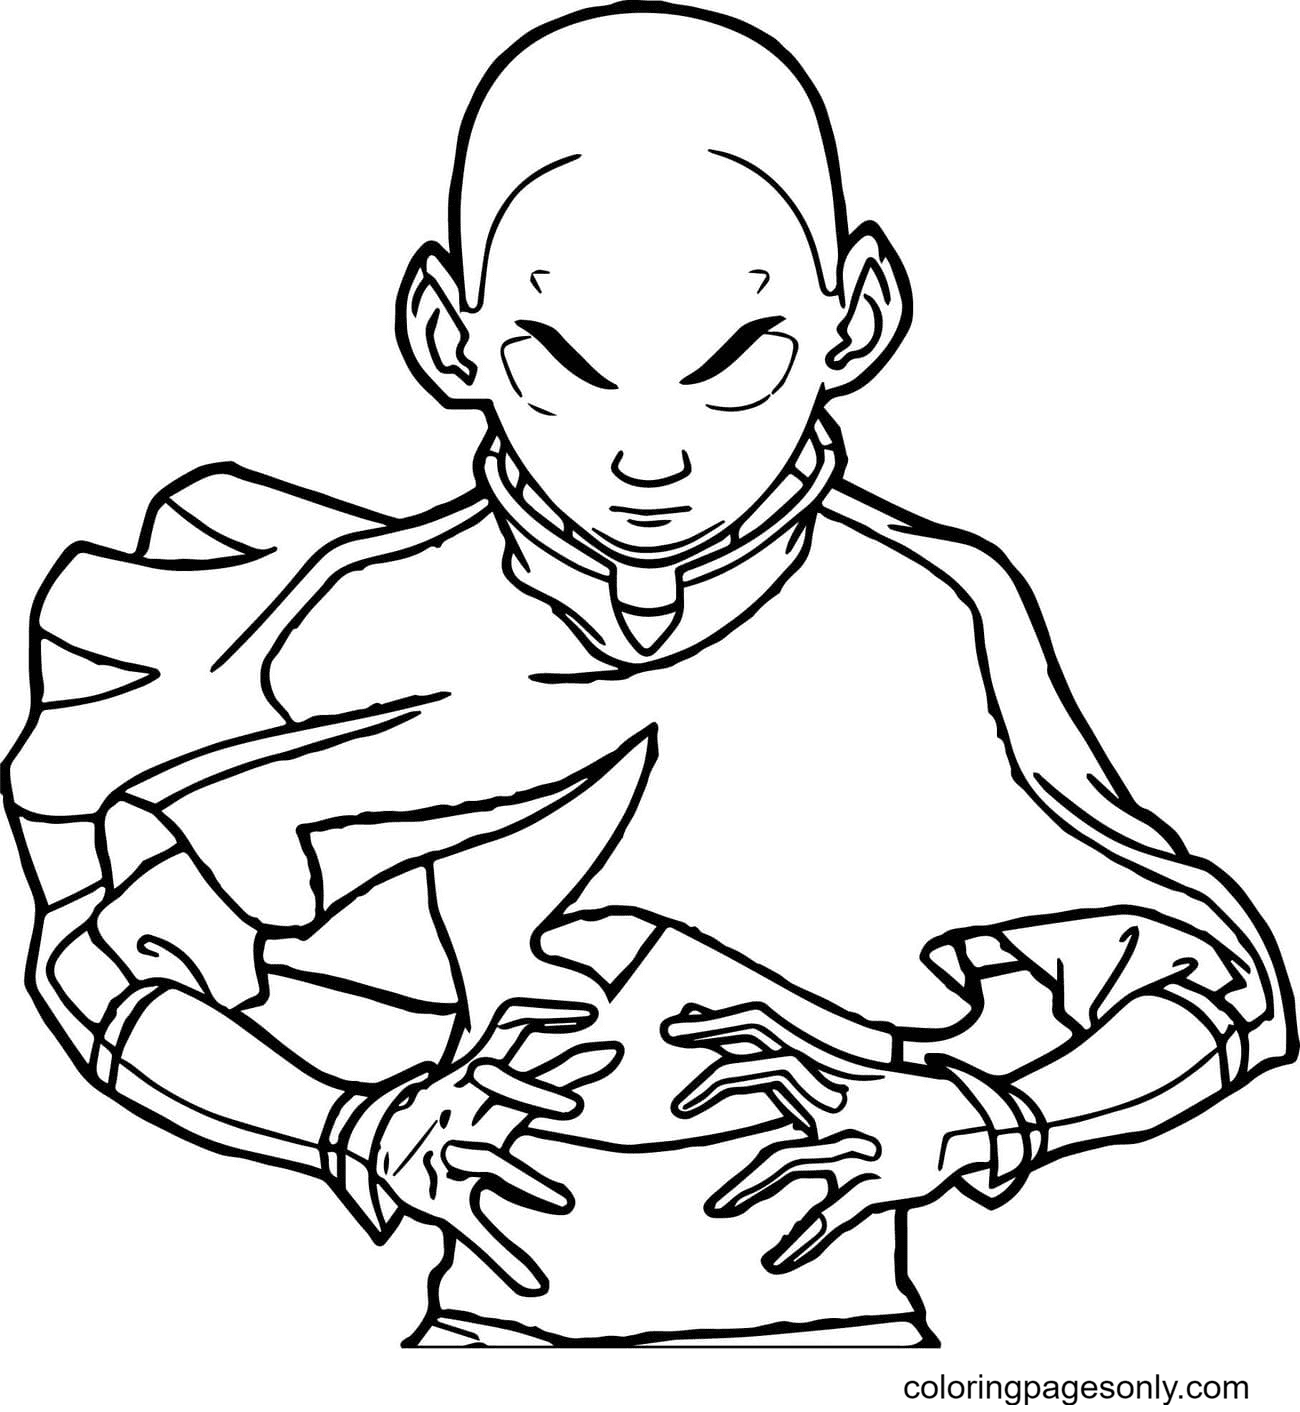 Aang rules the elements from Avatar